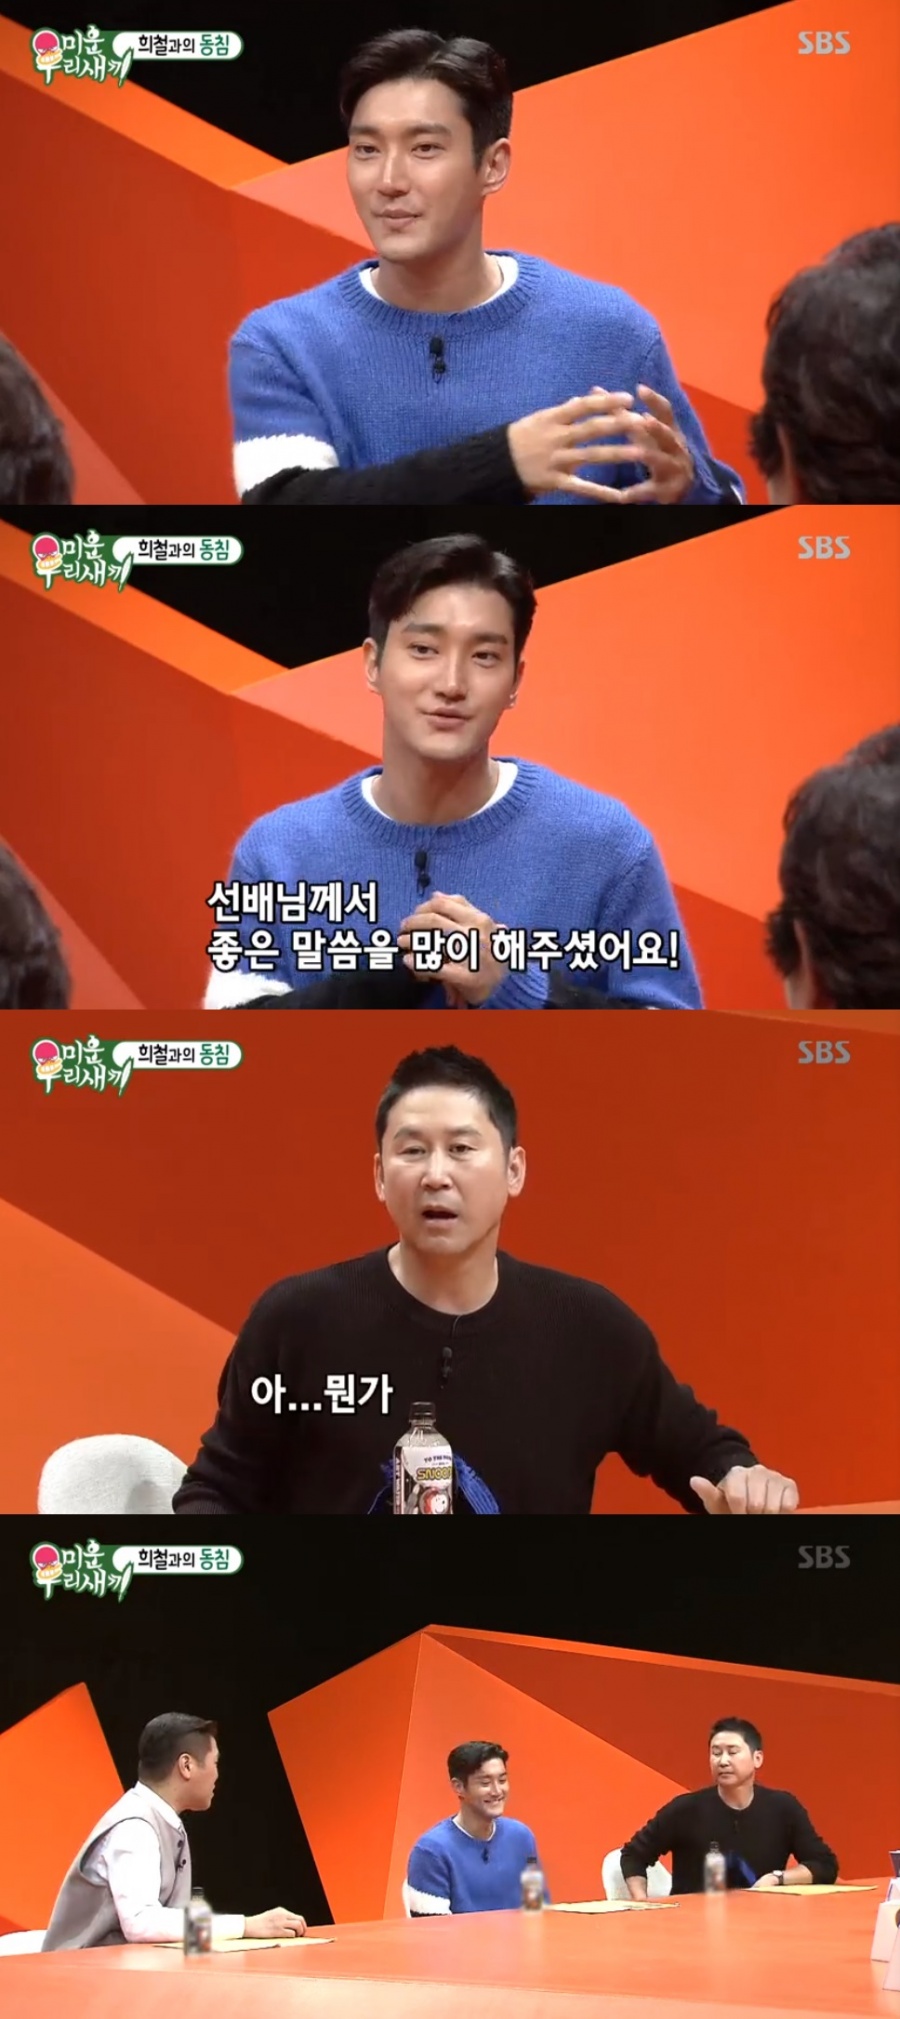 SBS My Little Old Boy guest Choi Siwon has appeared.On SBS My Little Old Boy broadcasted on the 24th, Choi Siwon gave thanks to Shin Dong-yup.Choi Siwon said there was something he had been grateful to Shin Dong-yup in the past.Shin Dong-yup said, Do not hurry and talk carefully. He laughed, saying, I am famous for not having a mitam.Shin Dong-yups mid-sentence, which Choi Siwon went through, ended with a lot of good words when he was broadcasting with Super Junior, and there was stillness in the studio.Shin Dong-yup was disappointed, saying, There was nothing concrete about itChoi Siwon said, Hee Chul is my brother as a person who can never marriage when she has a daughter later in my Little Old Boy.Kim Hee-chul Mother expected it but said, Im going to be pissed.Choi Siwon recalled the time when Kim Hee-chul chose Kim Hee-chul because he was sensitive to Kim Hee-chuls personality when he was living as a roommate, saying, Kim Hee-chul uses a bed with his brother, he should not cross the line.